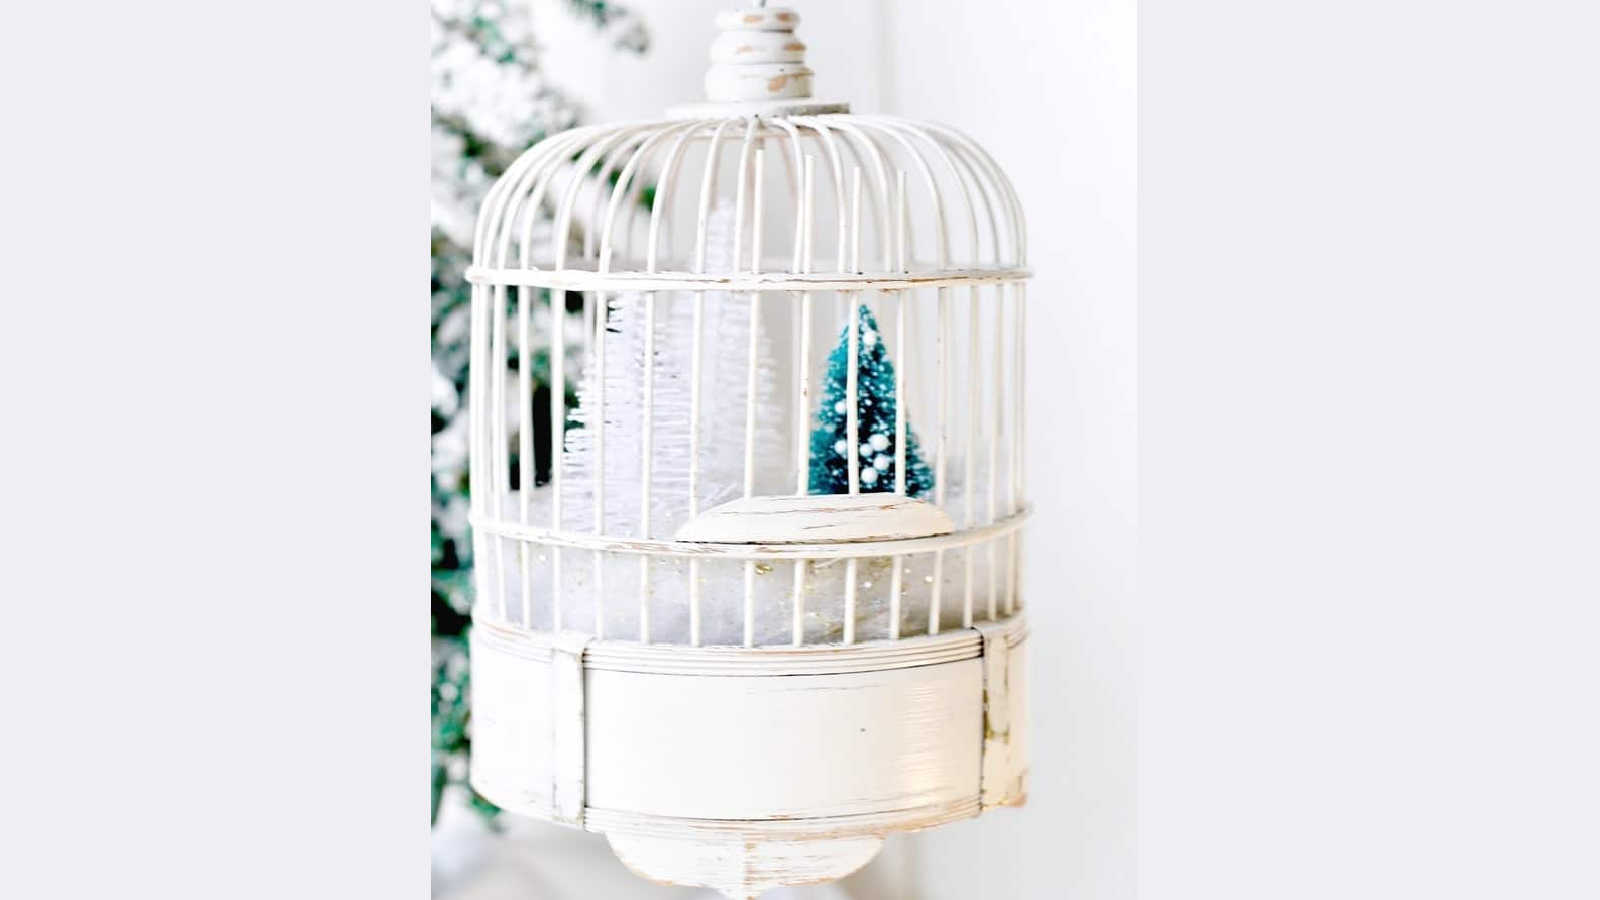 snow scene in a bamboo bird cage